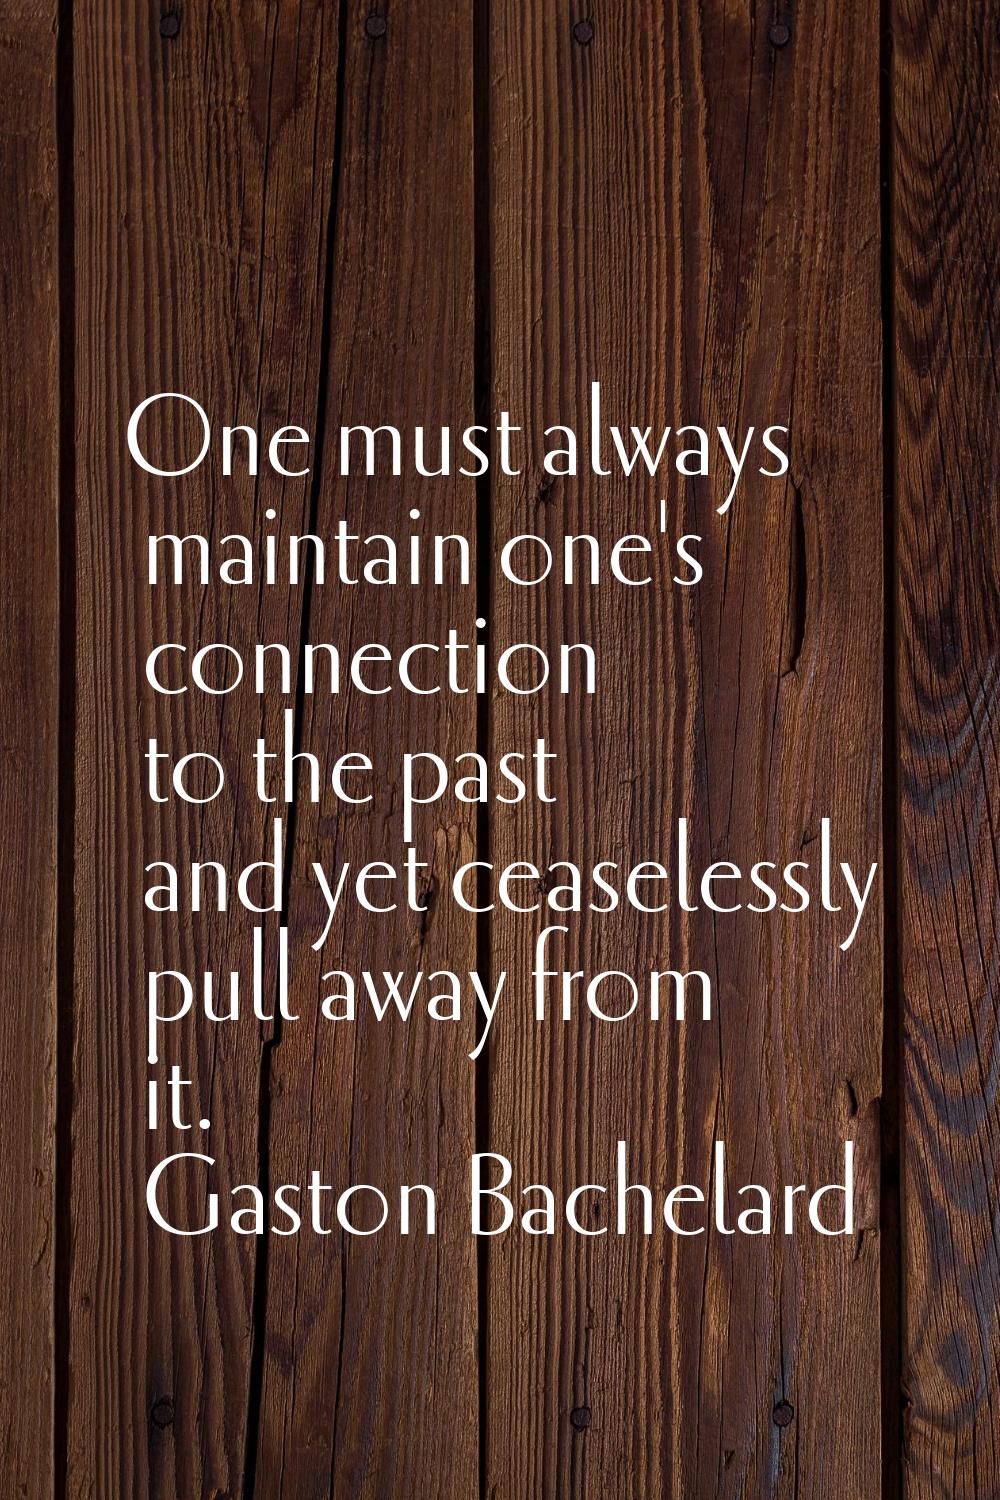 One must always maintain one's connection to the past and yet ceaselessly pull away from it.